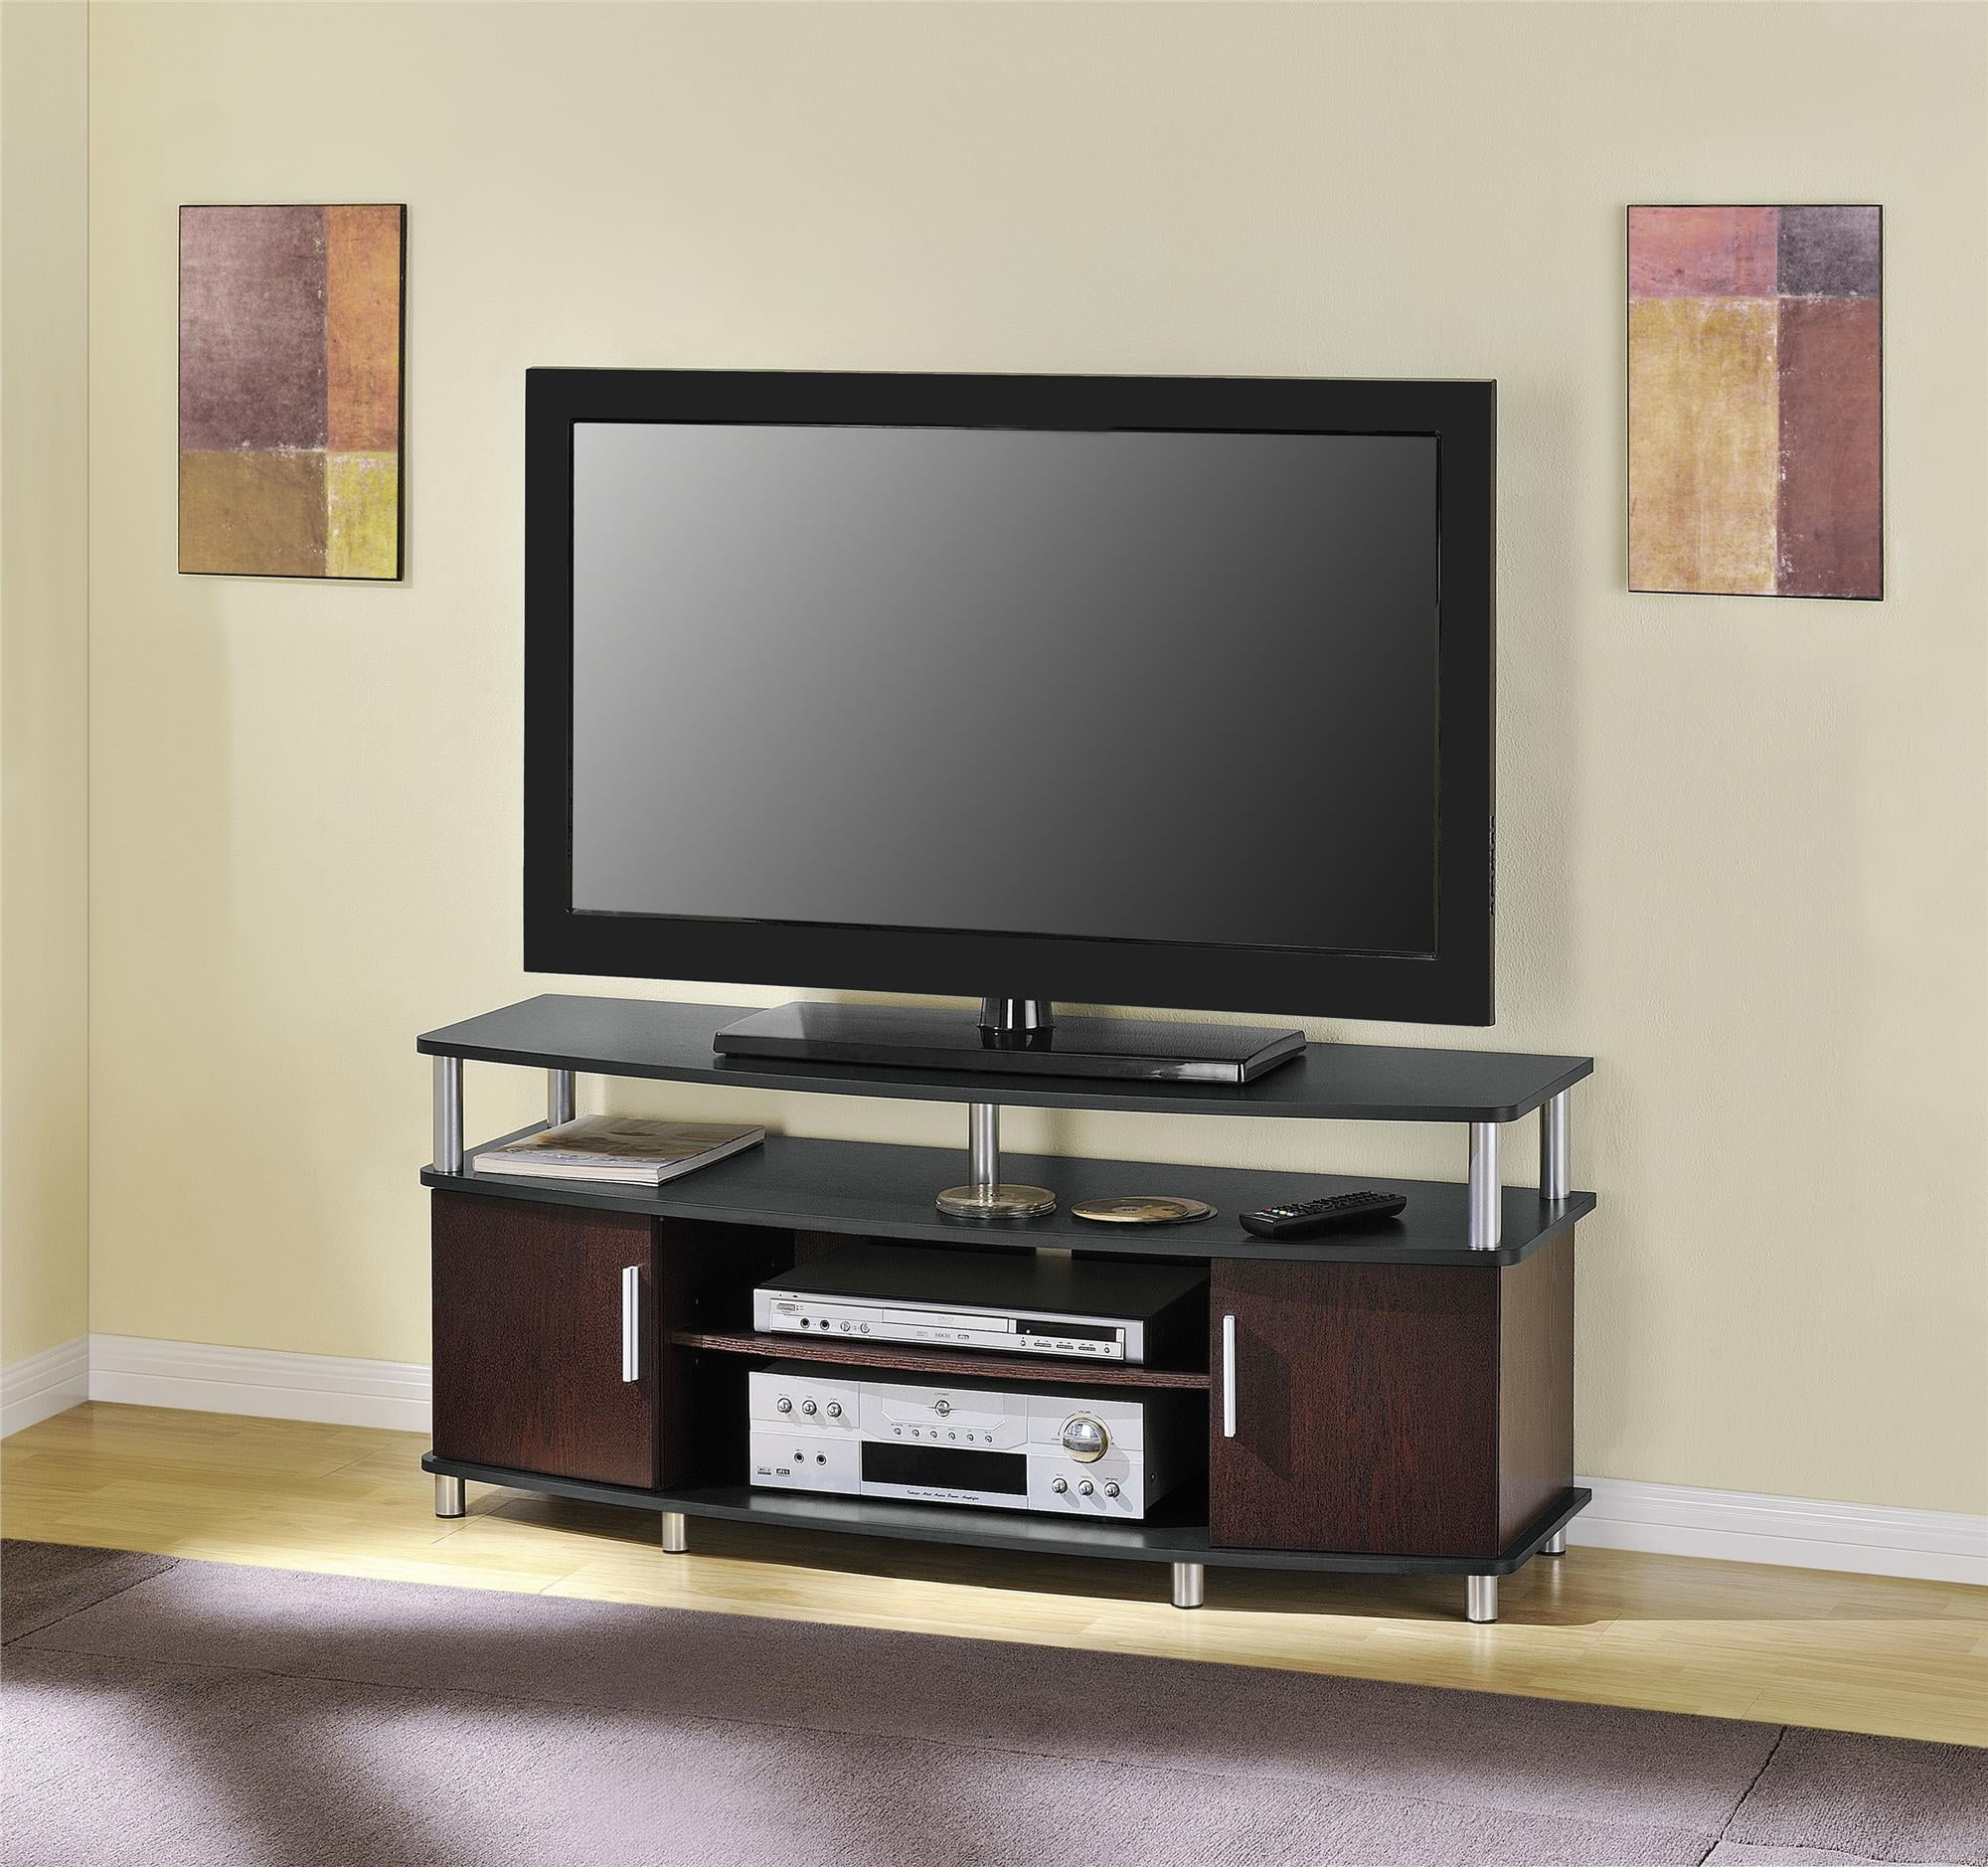 Carson TV Stand for TVs up to 50", Cherry - image 2 of 12